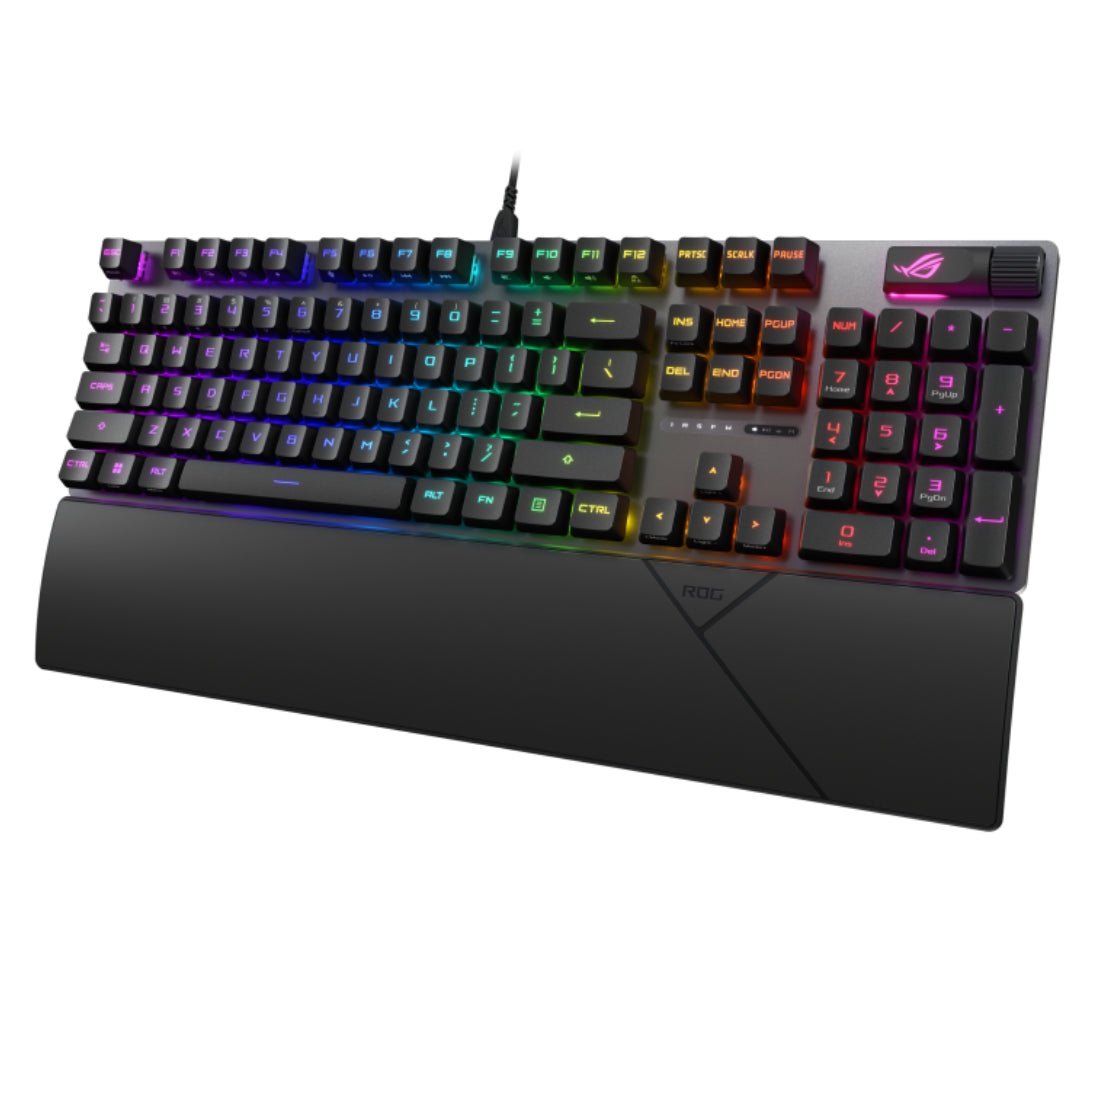 Asus ROG Strix Scope II RX Full Wired Keyboard - Red Switches - لوحة مفاتيح - Store 974 | ستور ٩٧٤